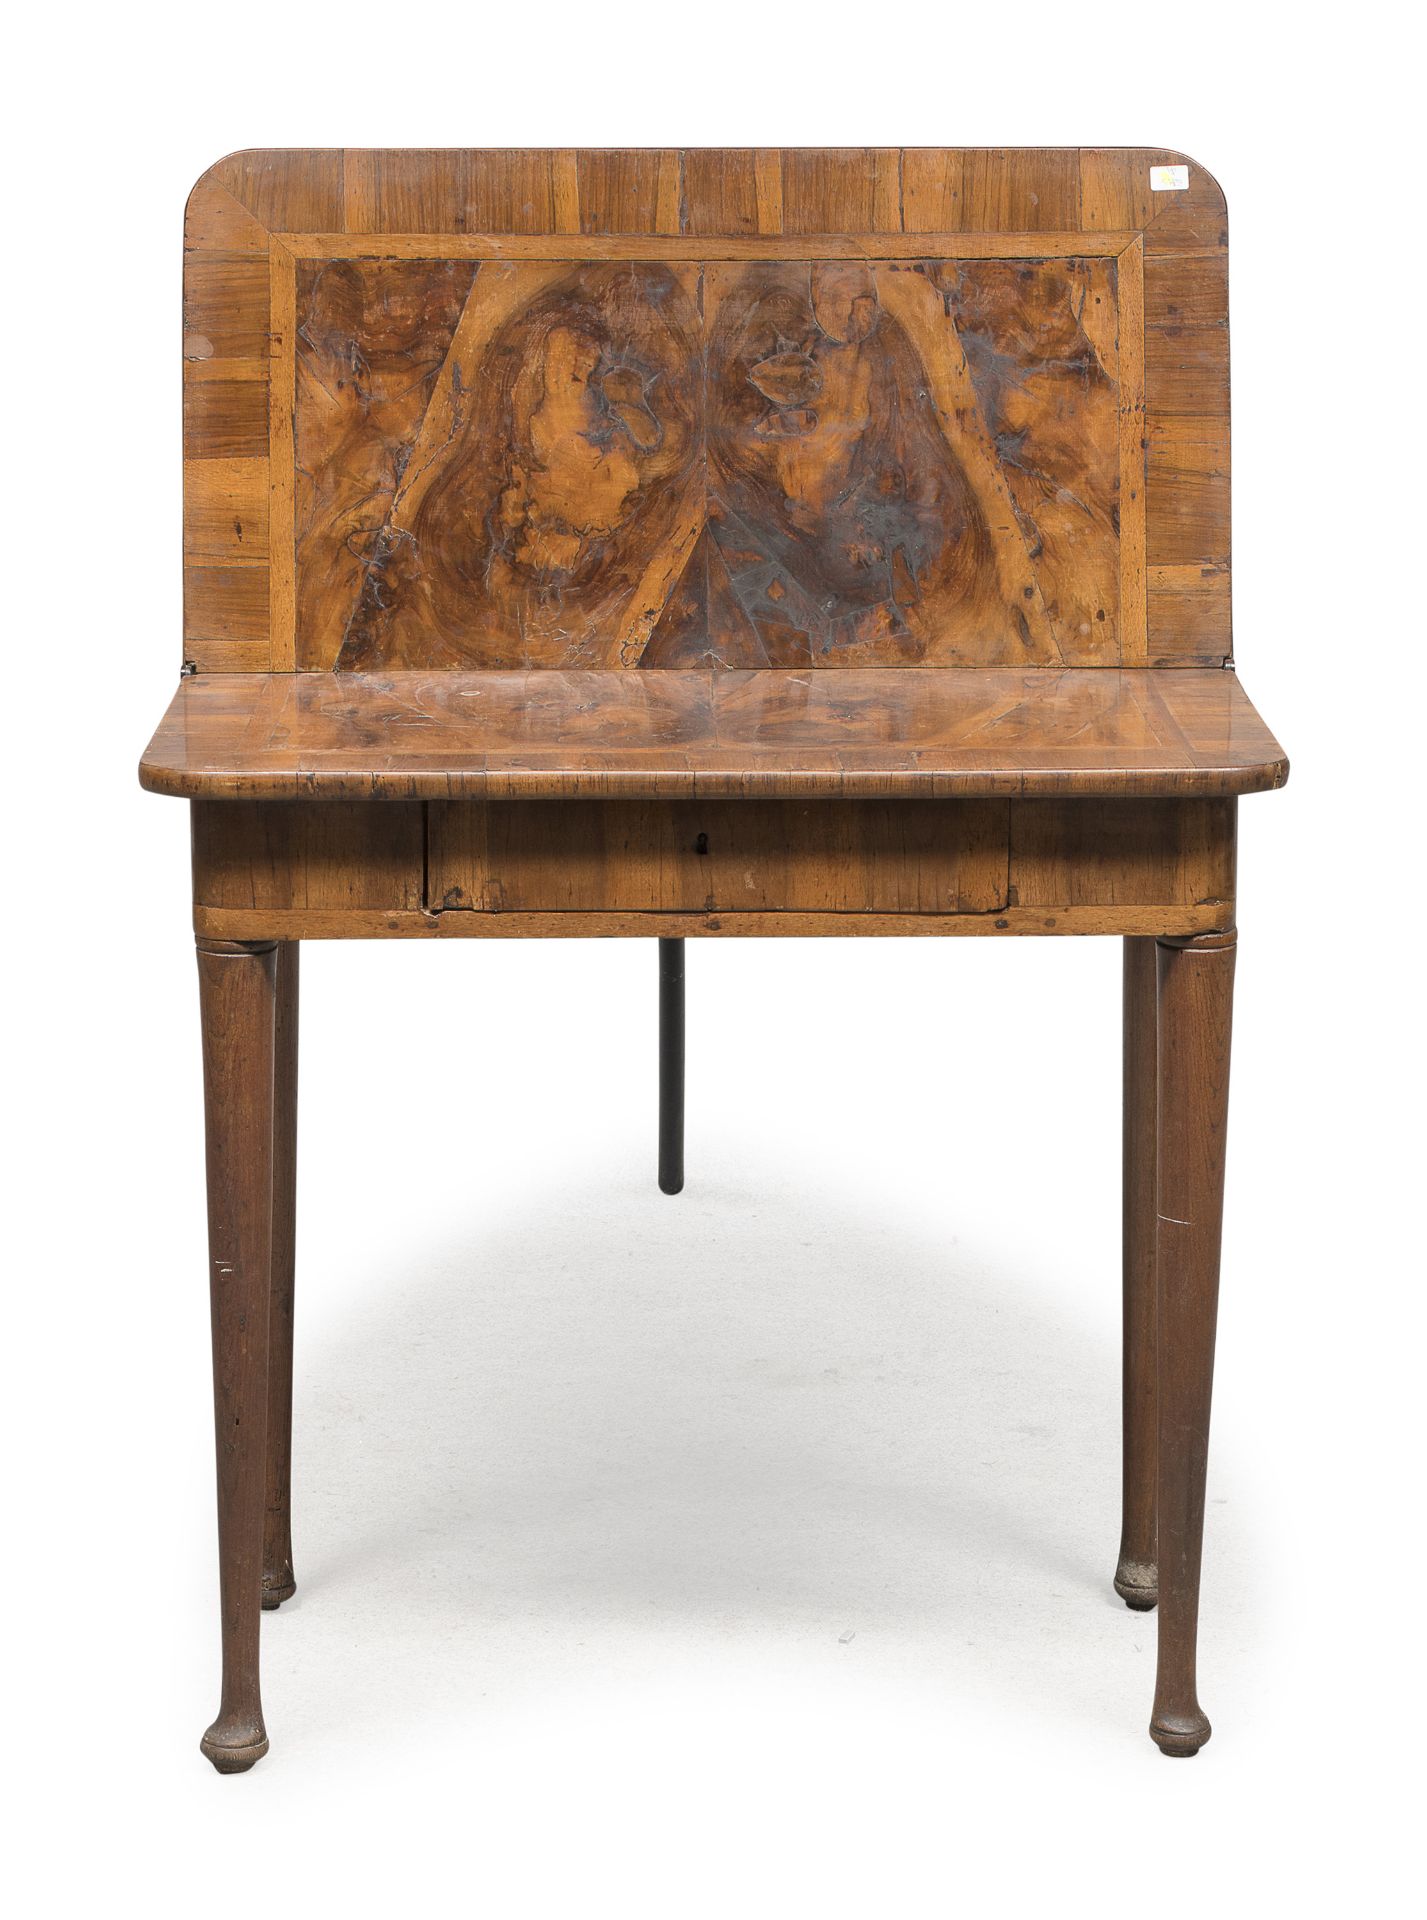 WALNUT BRIAR GAME TABLE CENTRAL ITALY 18th CENTURY - Image 2 of 2